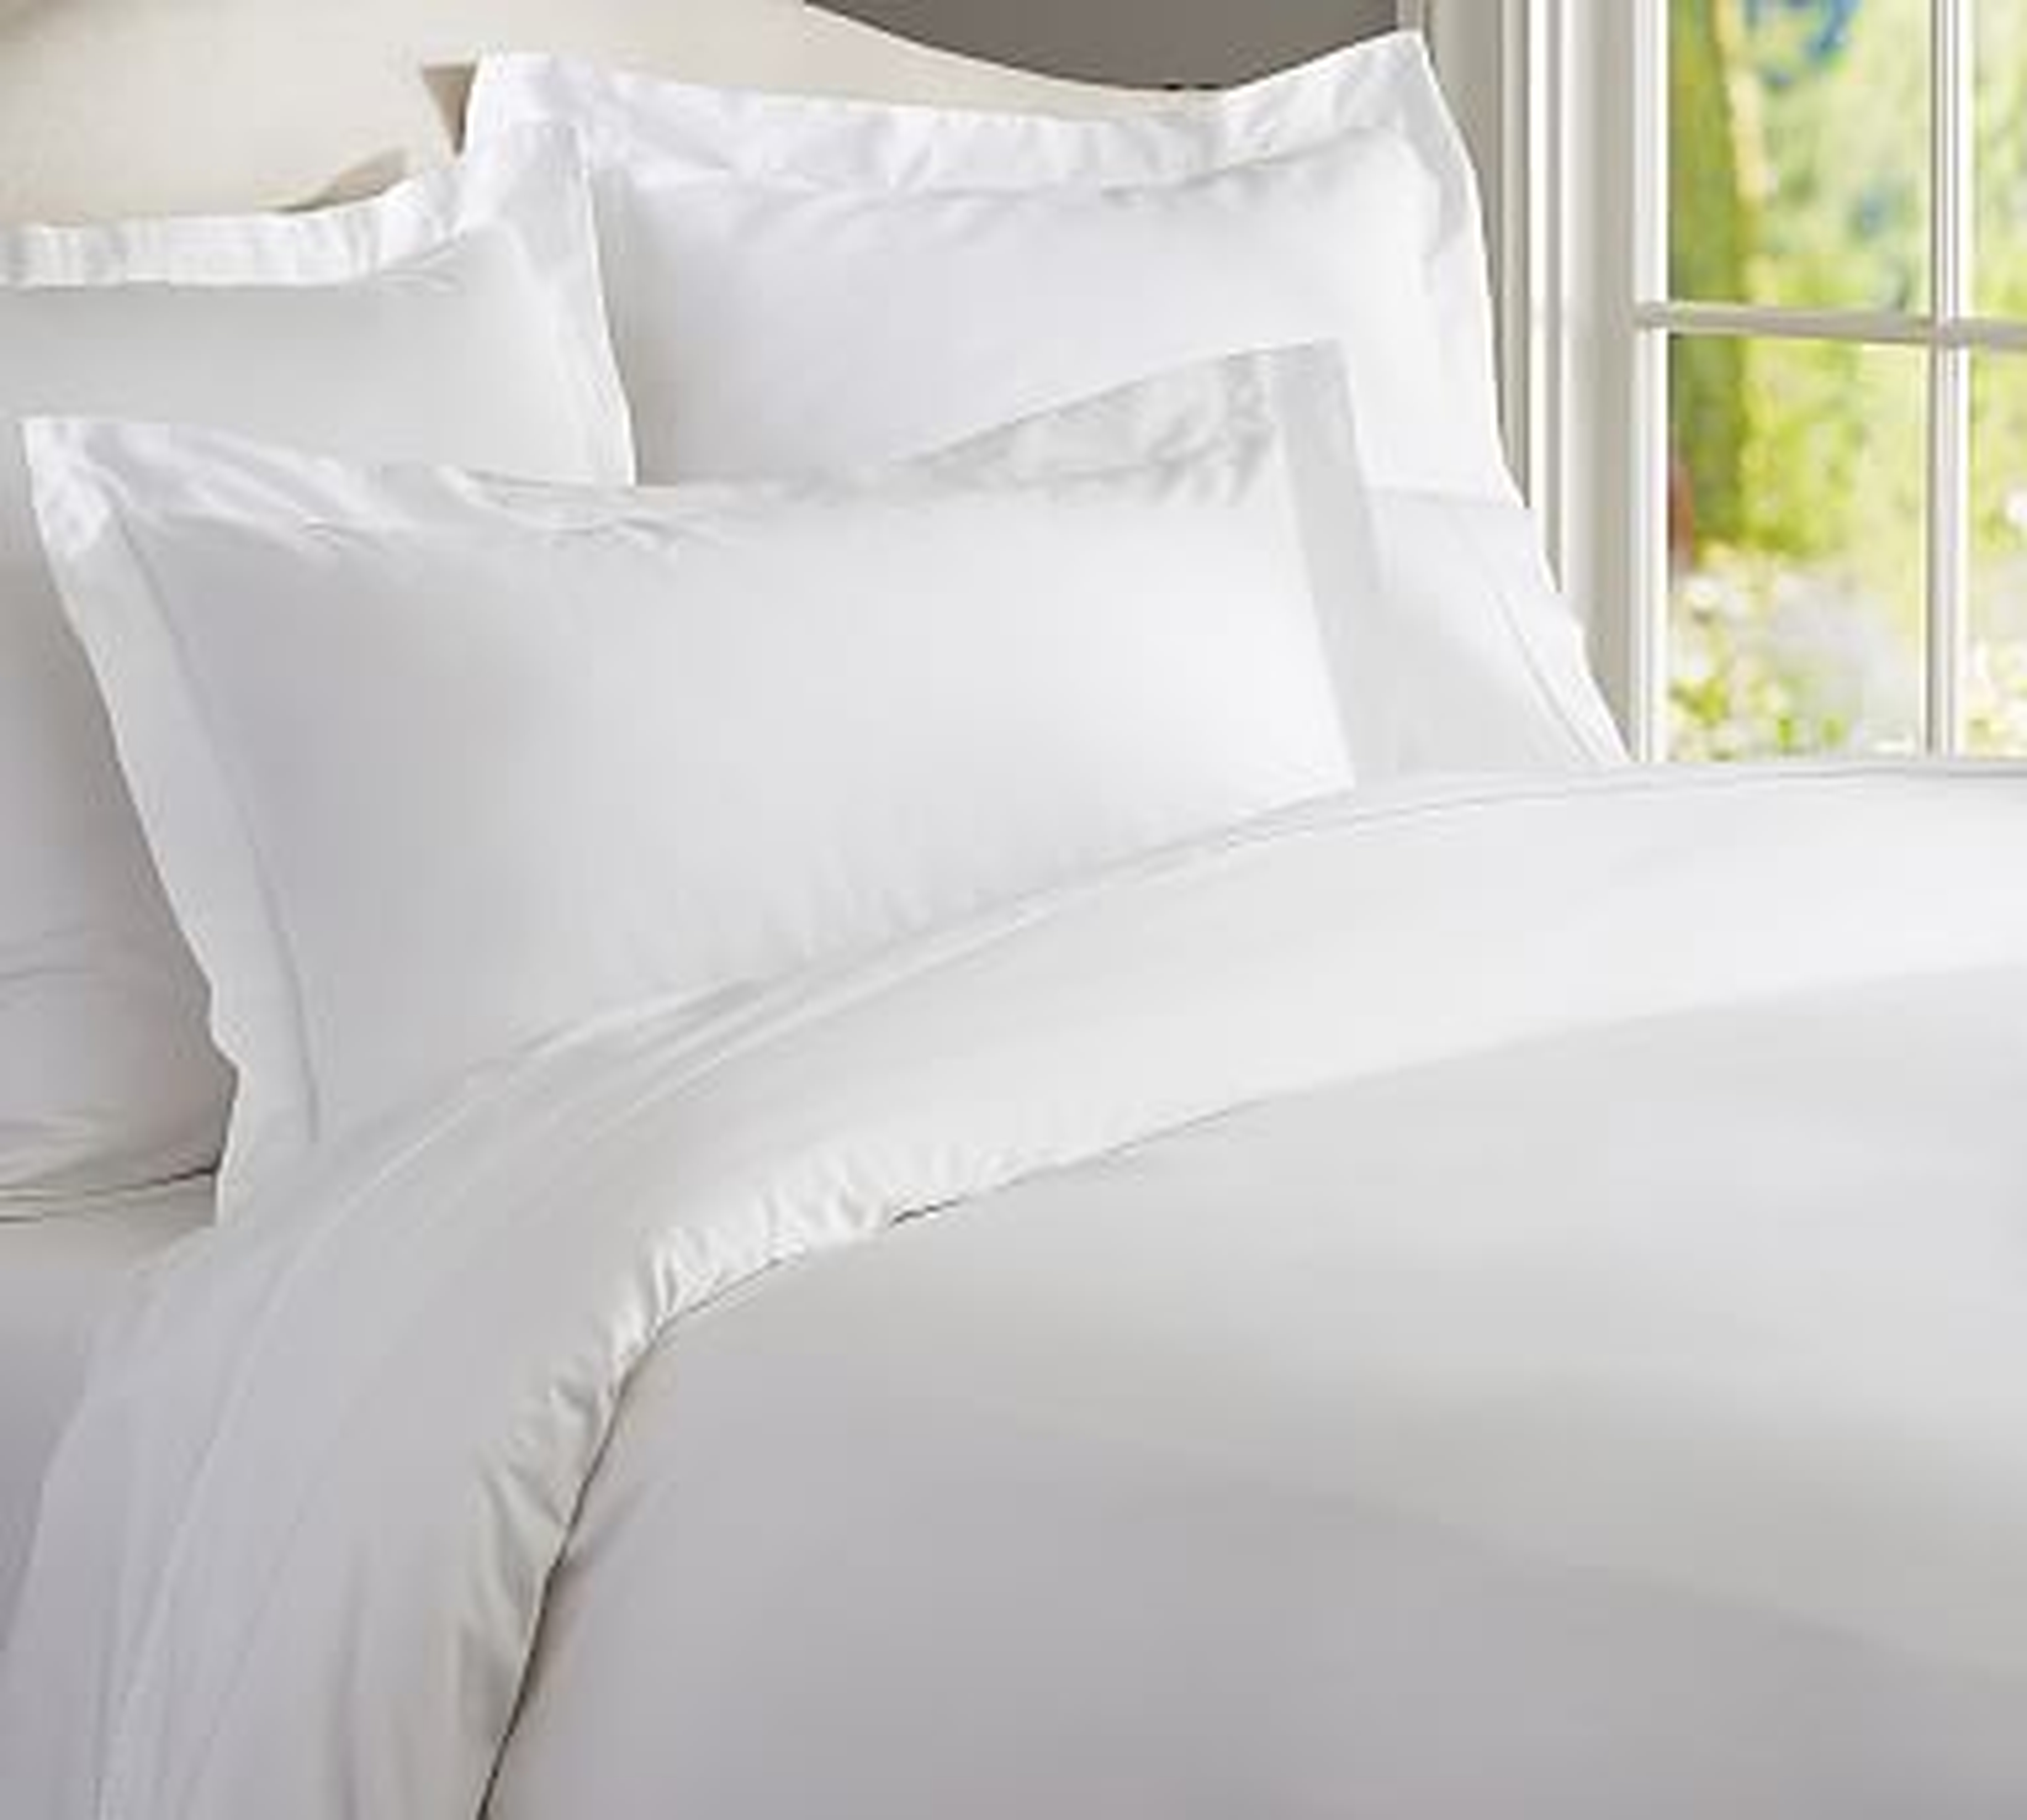 PB Essential Bedding Set, Queen, White - Pottery Barn